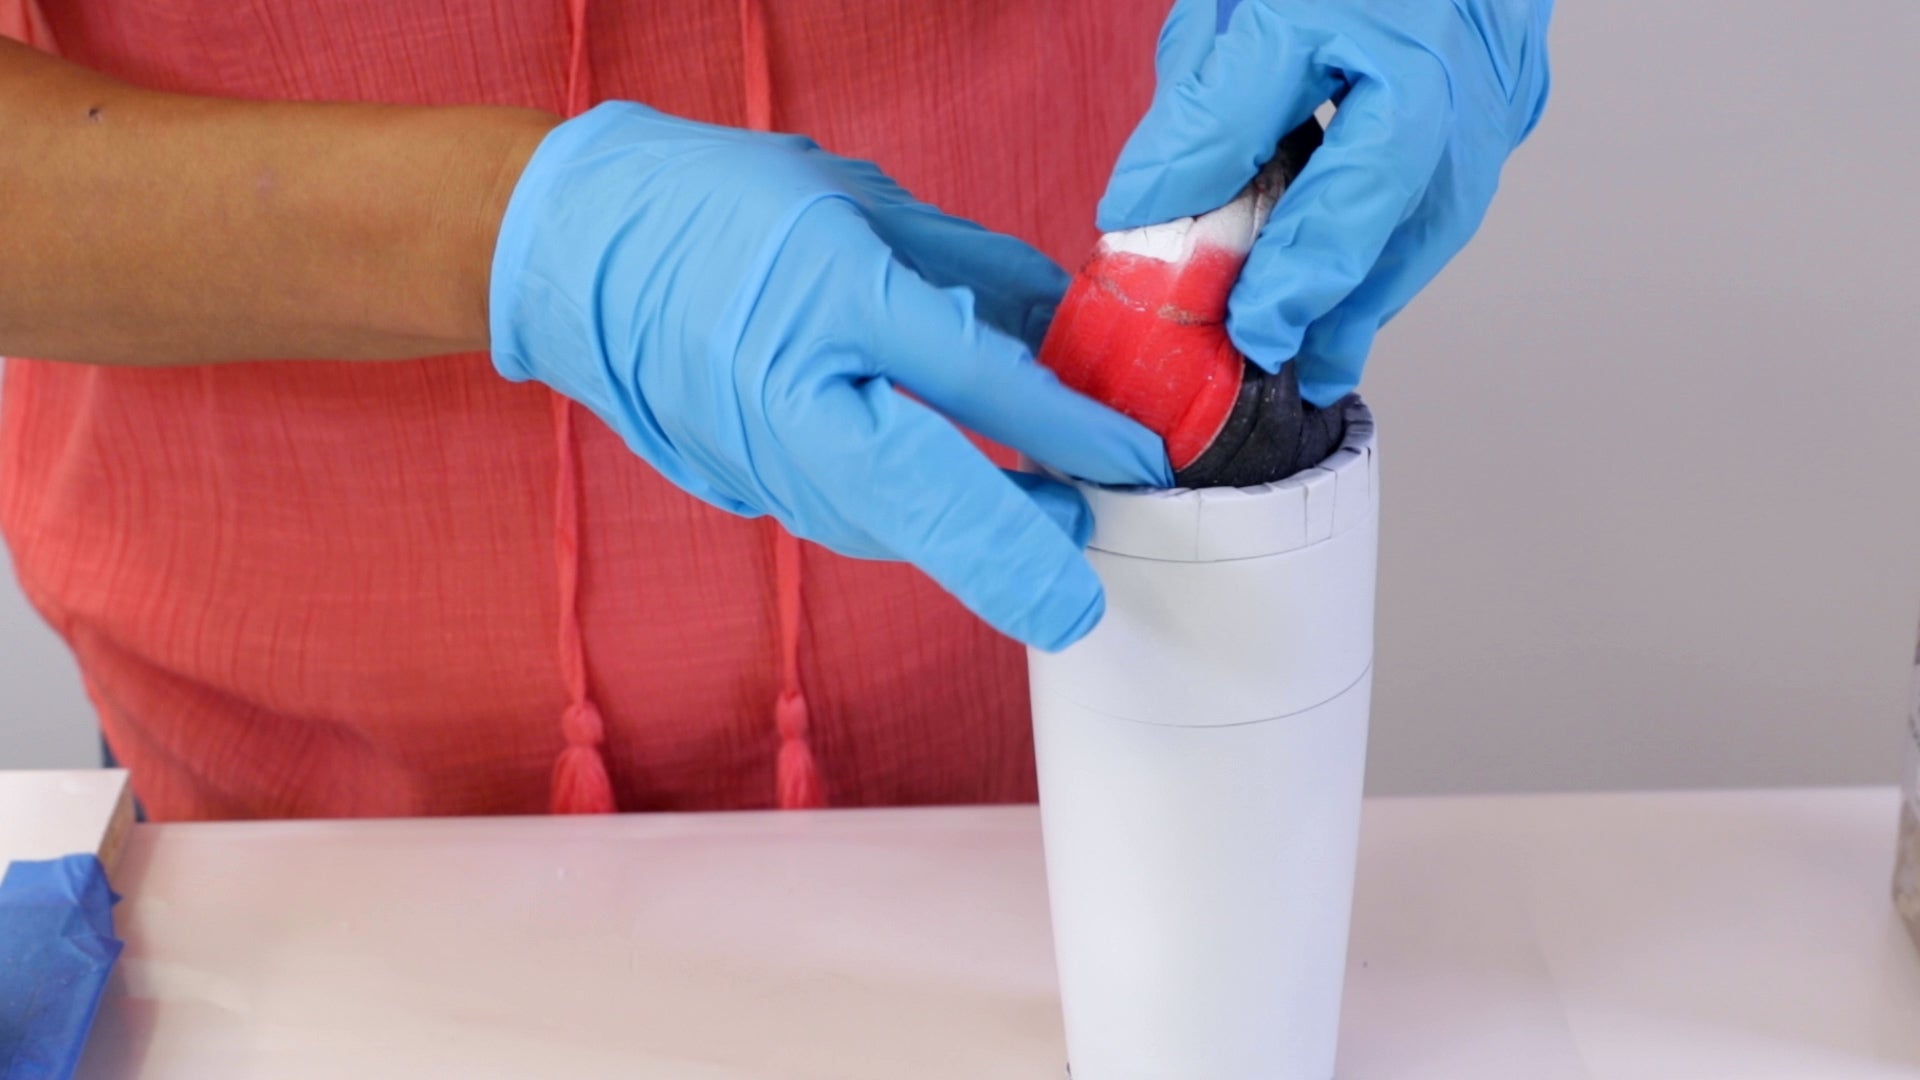 Make A Resin Tumbler - popsicle stick or gloved finger to carefully spread it